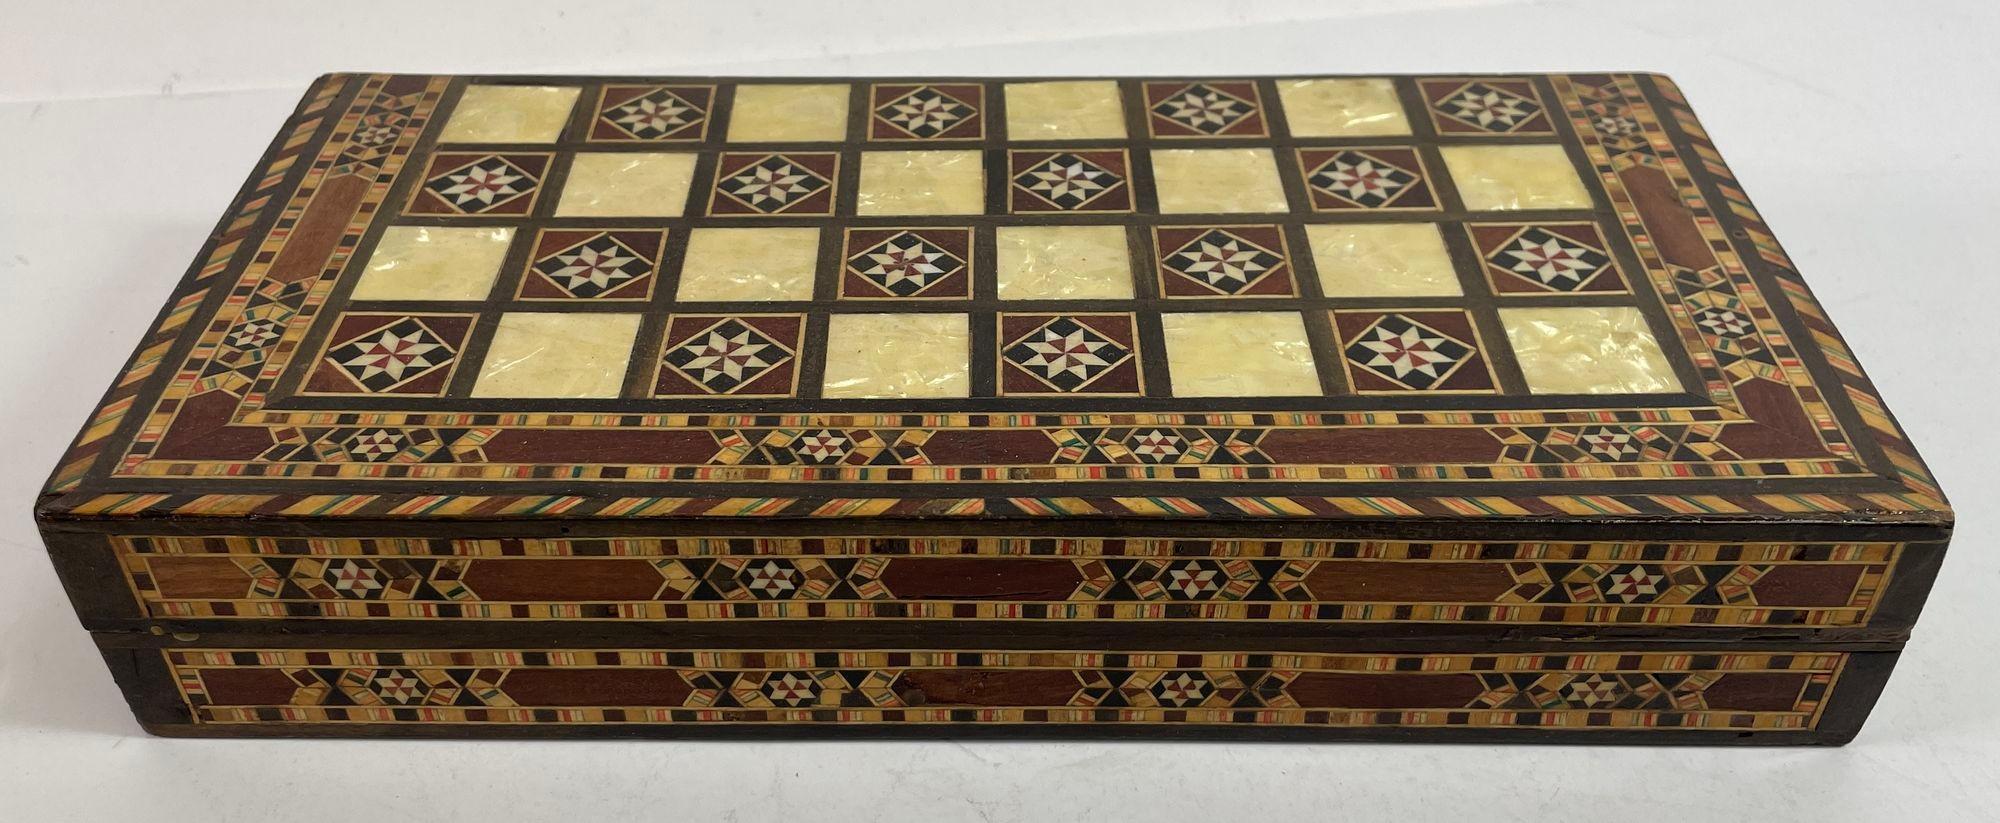 Middle Eastern Mosaic Wooden Inlaid Marquetry Box Game Backgammon and Chess.
Middle Eastern Micro Mosaic Wooden Inlaid Marquetry Box.
Large vintage Moorish Syrian style micro mosaic Inlay marquetry mosaic backgammon and chess game box.
Amazing